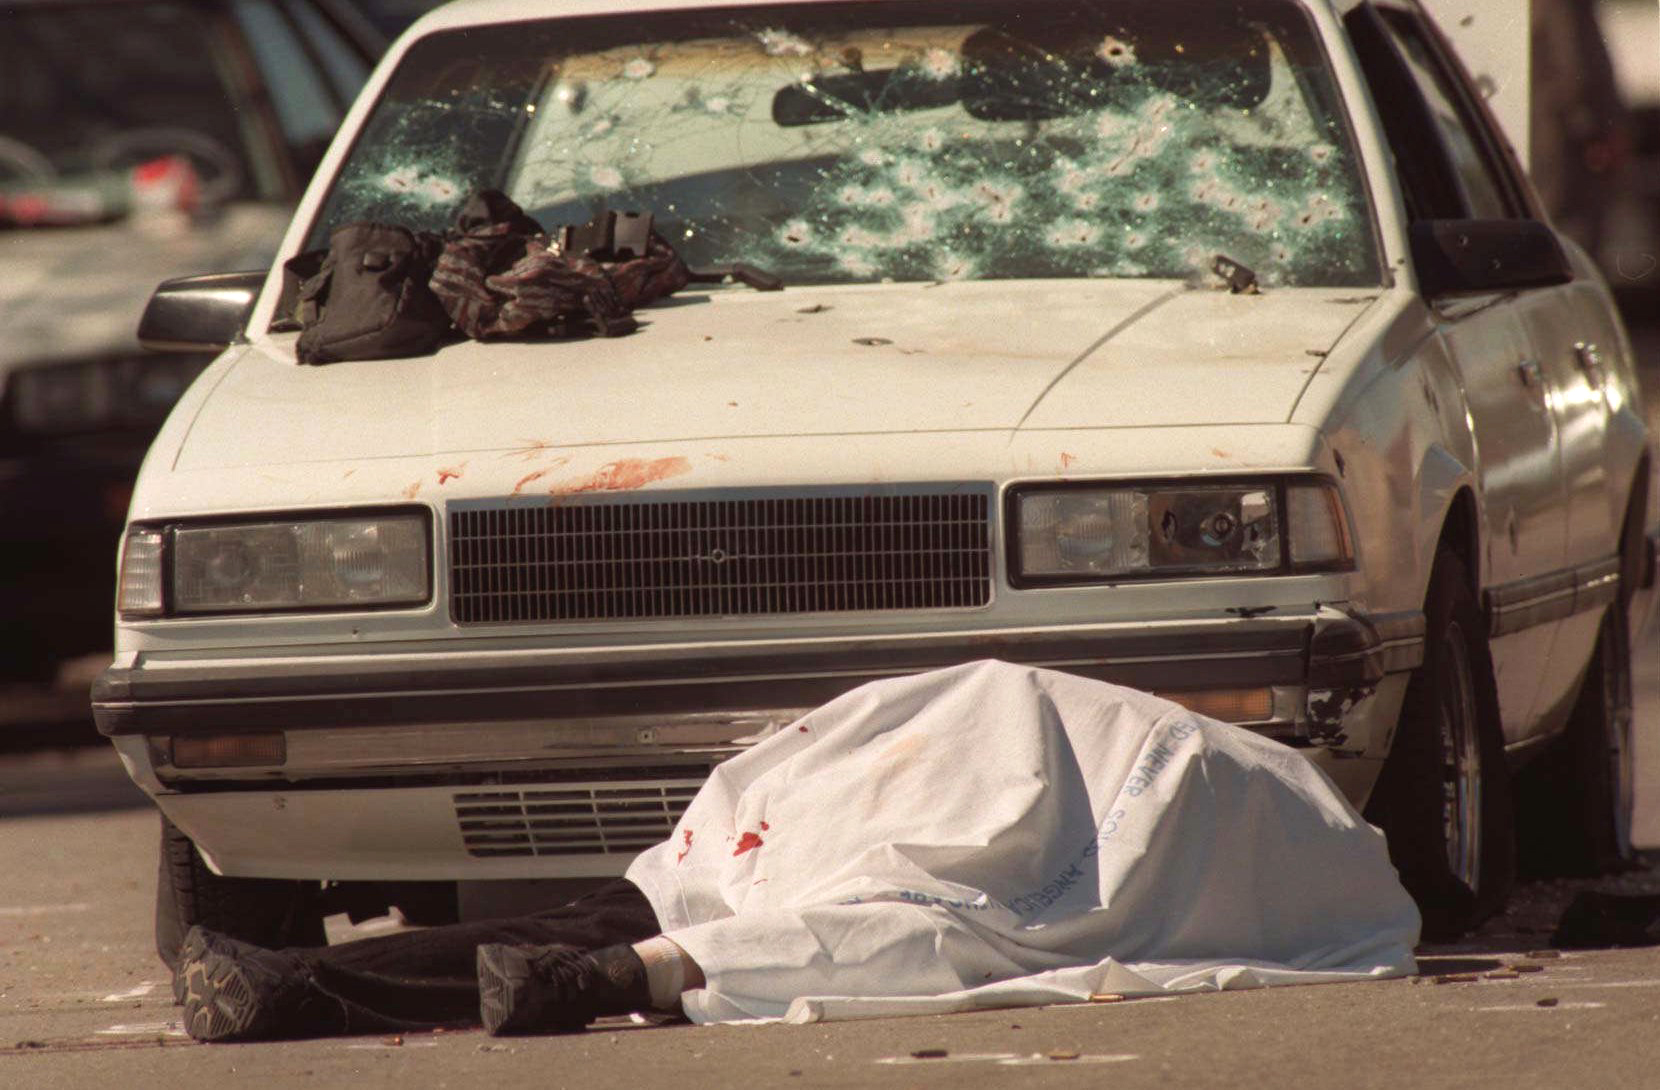 Emil Mătăsăreanu lies dead in front of a car peppered with bullet holes during a botched bank robbery and subsequent shootout in North Hollywood.